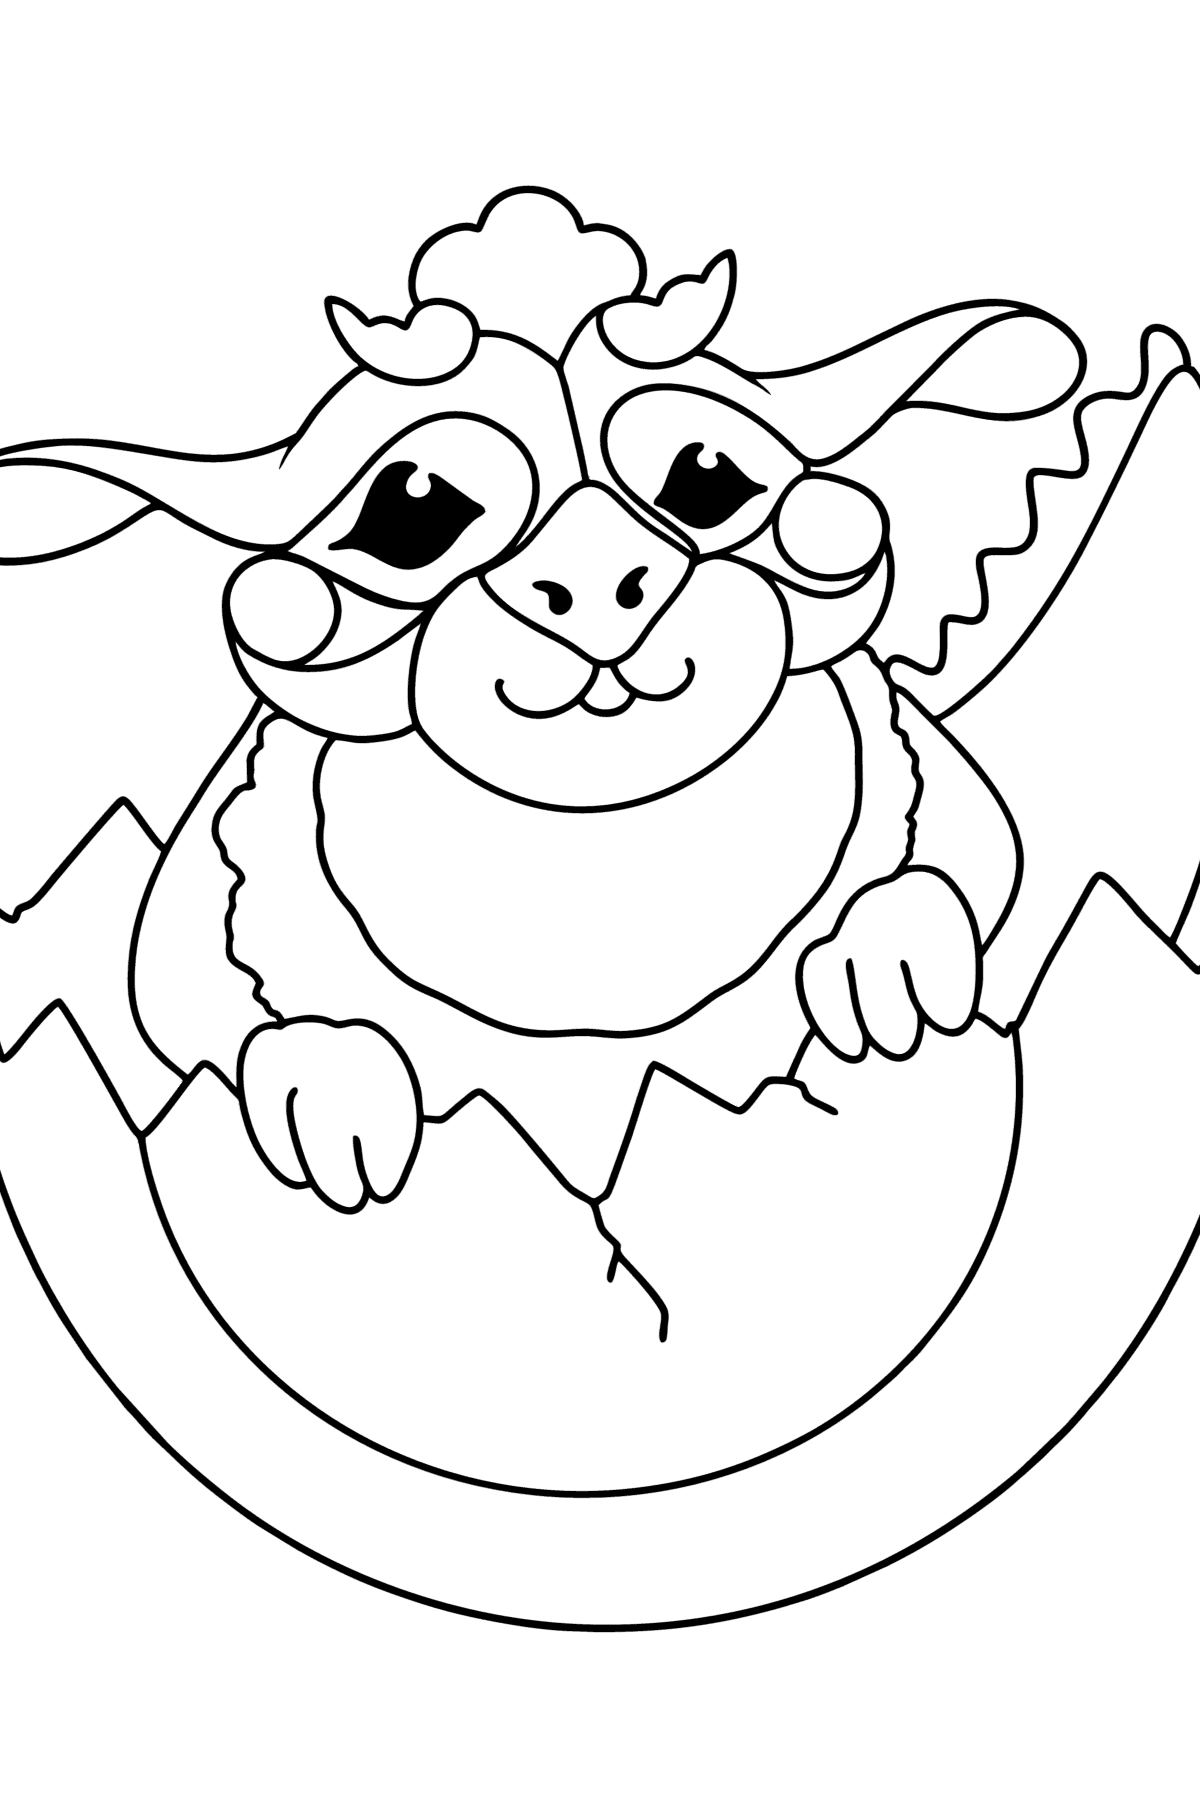 Little dragon coloring page - Coloring Pages for Kids